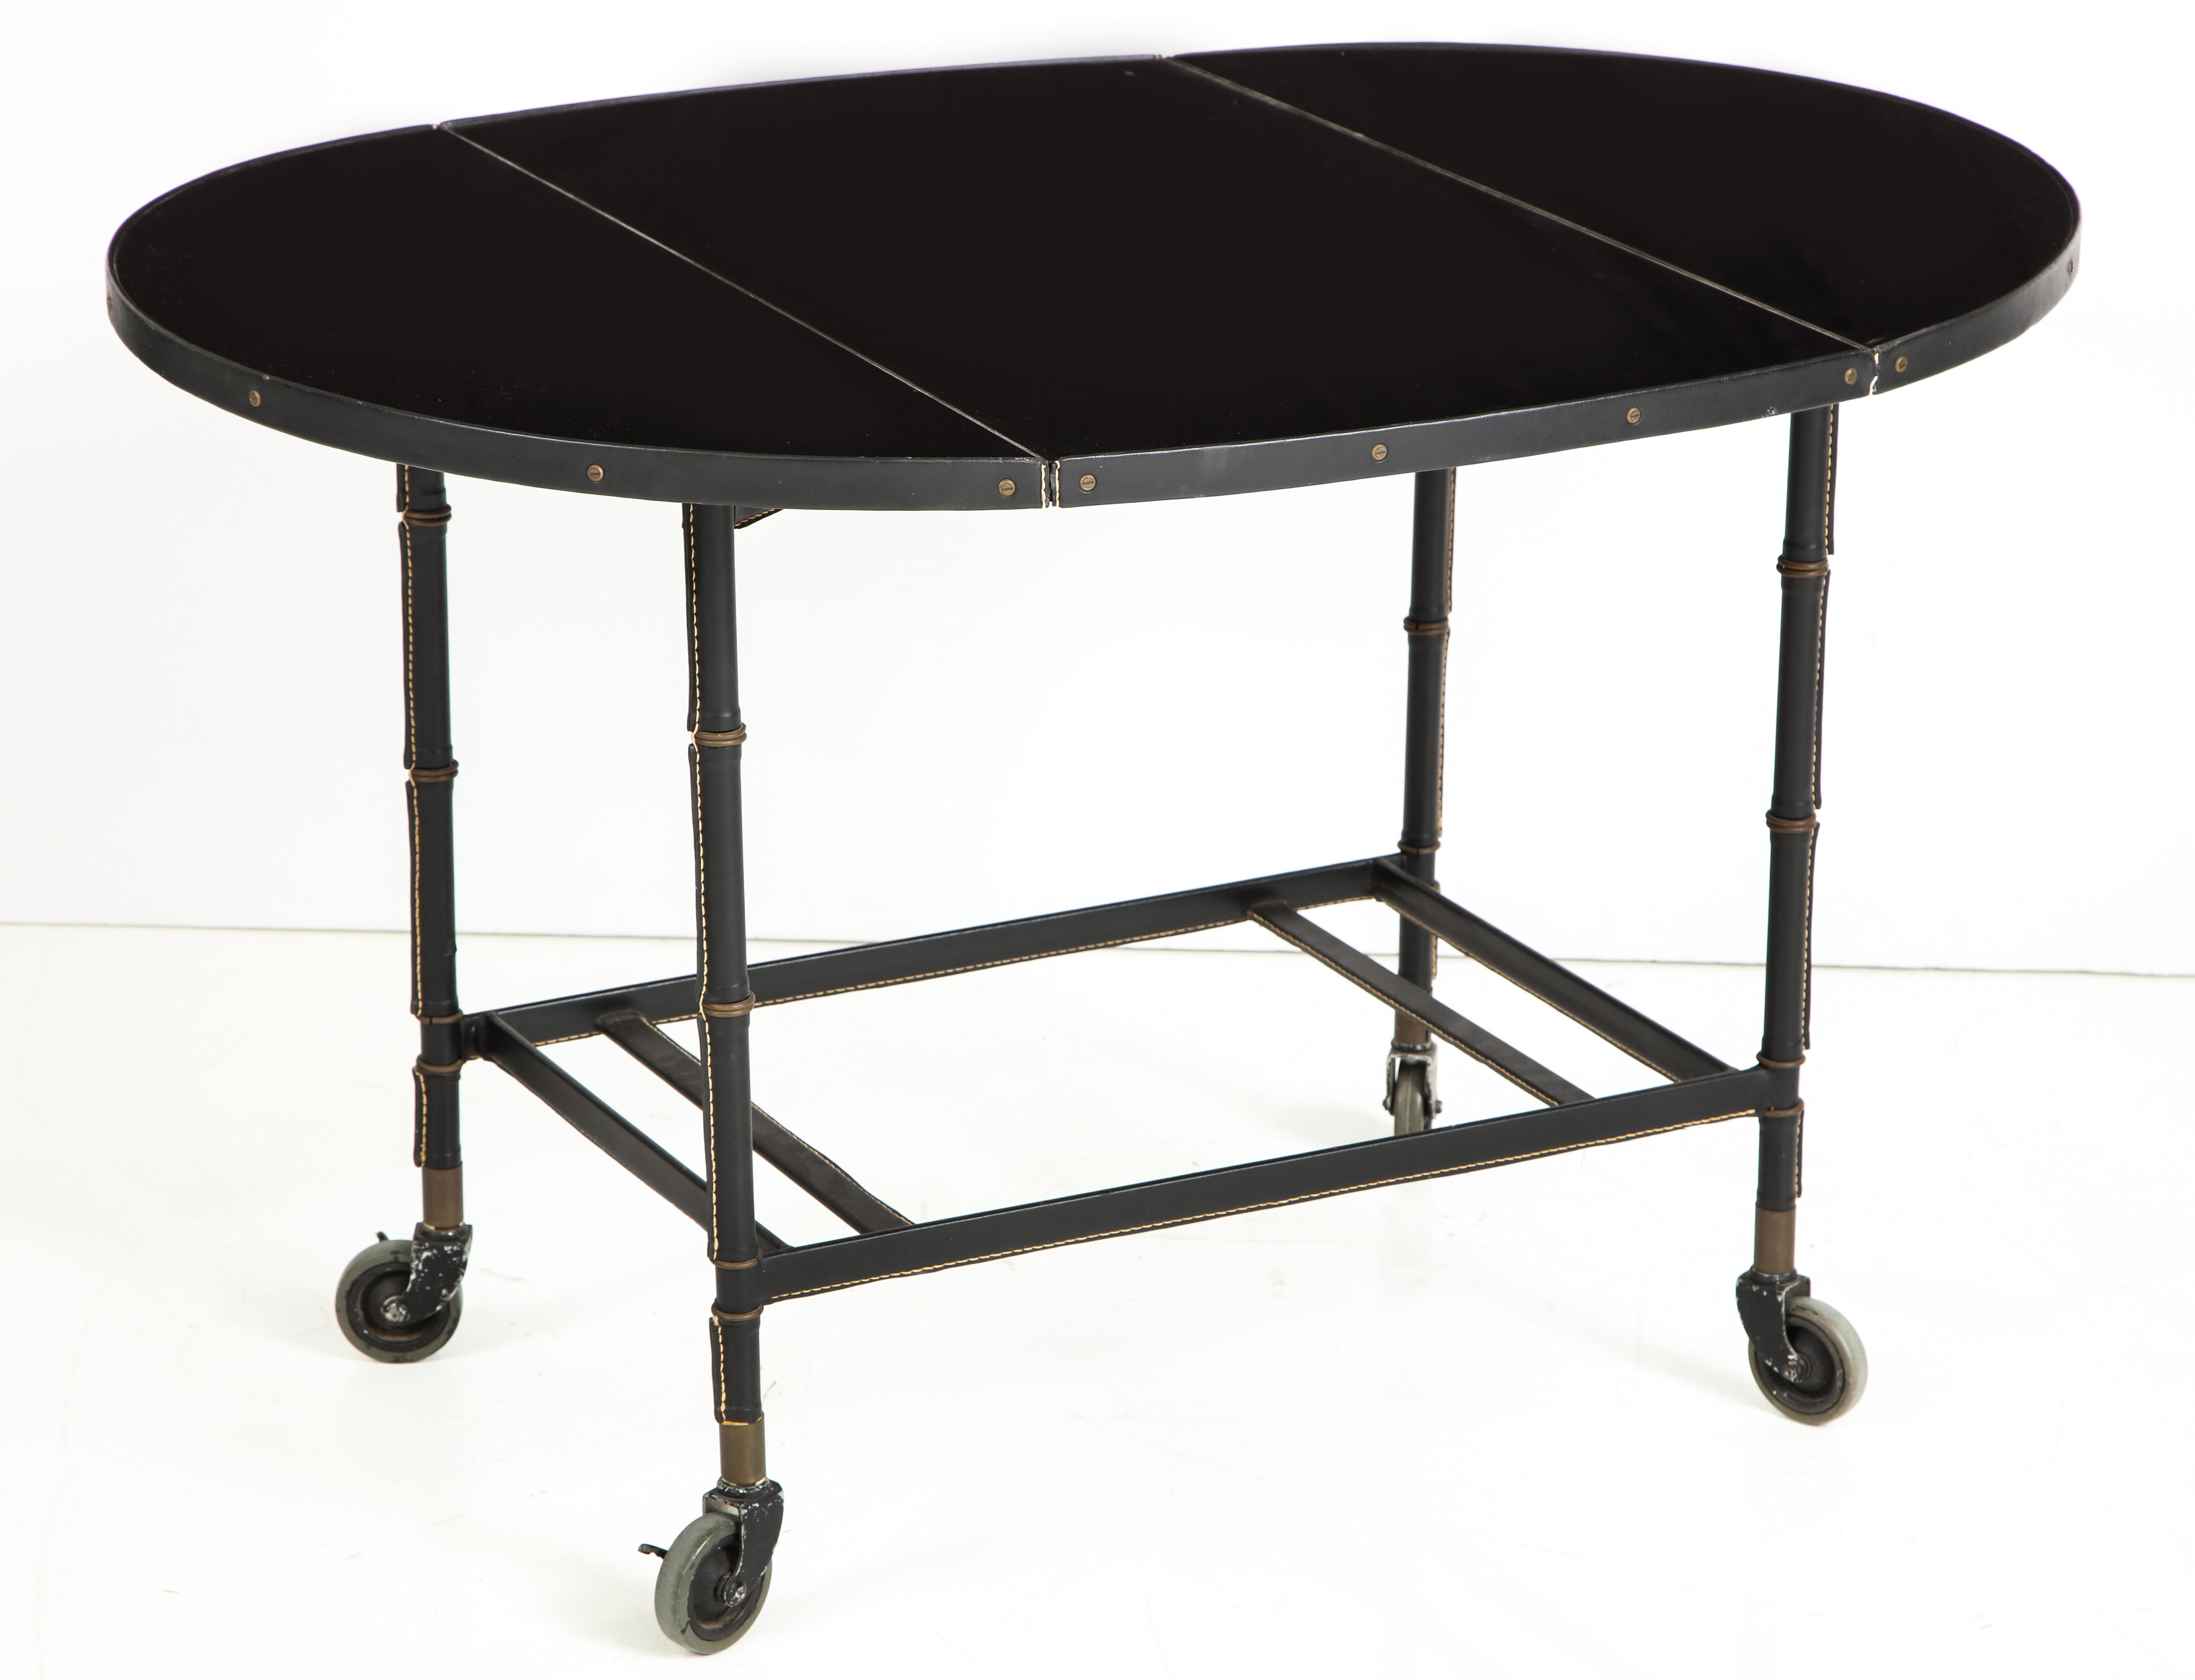 A fine example of Adnet's work with stitched leather covered legs and a black lacquered top. The drop leaf design allows for easy placement and the casters make it a versatile serving table. The indicated measurements are when open. When the leaves